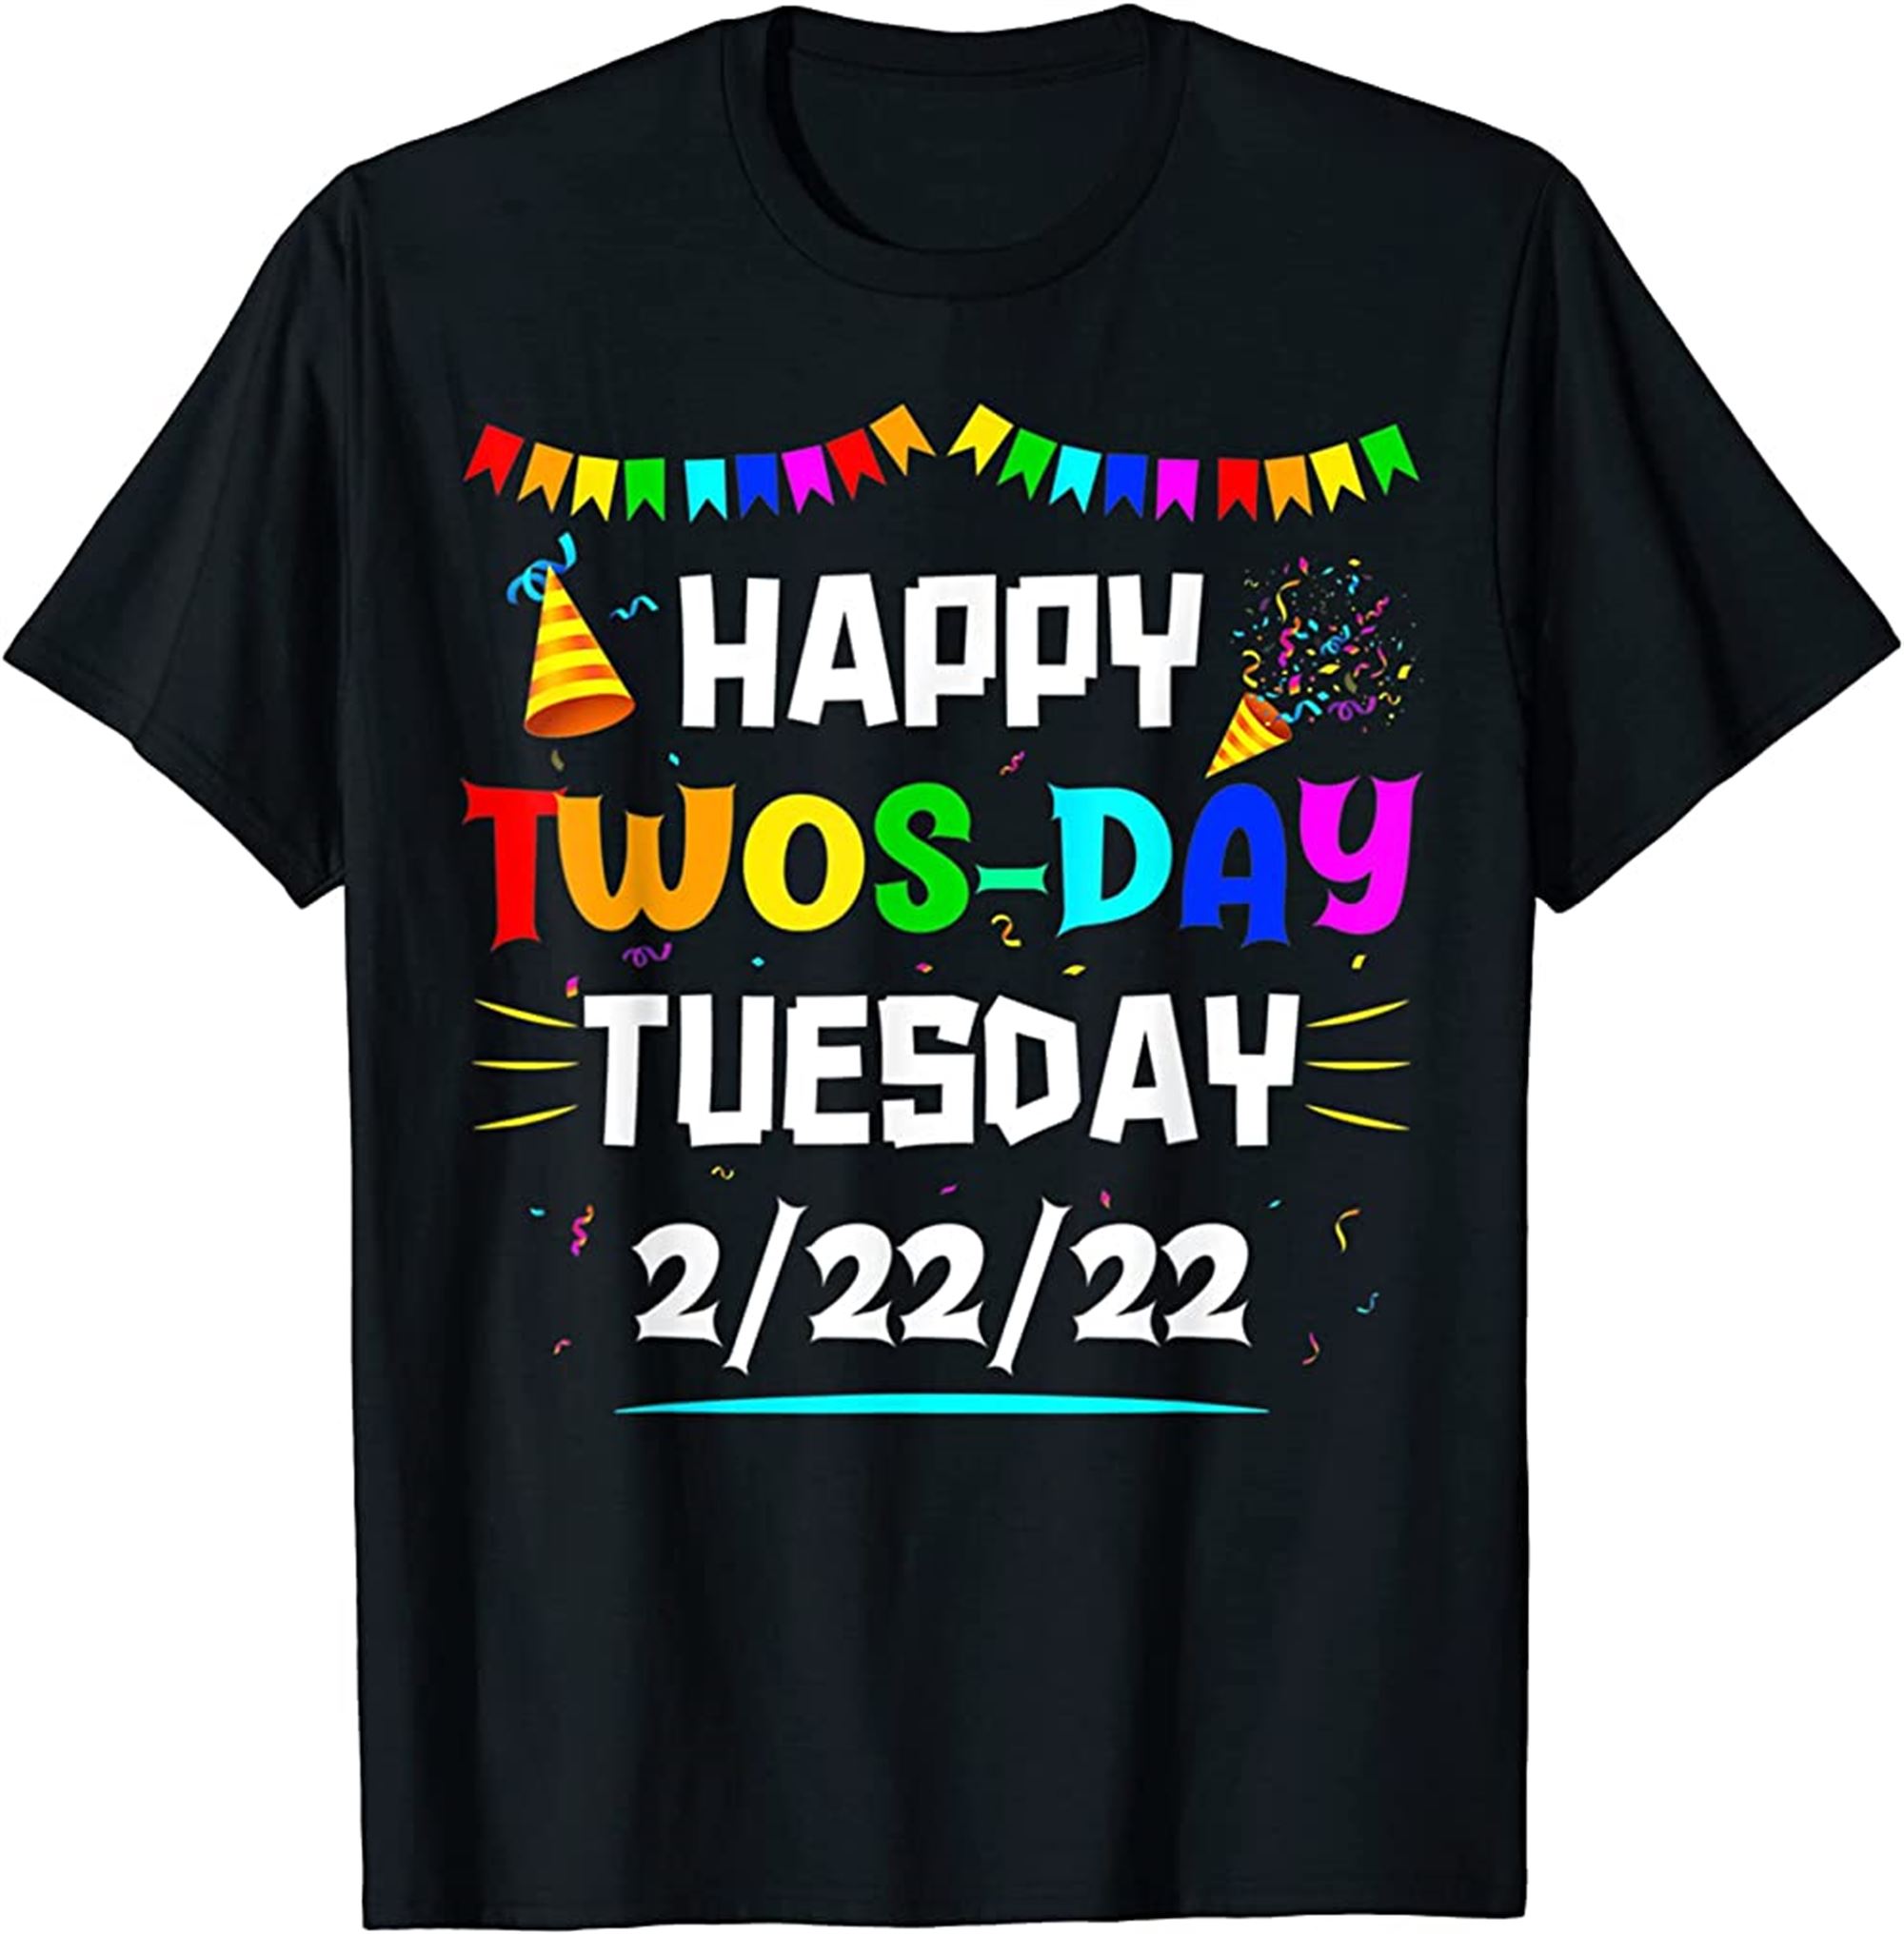 2022 Funny 22222 Event T-shirt Full Size Up To 5xl